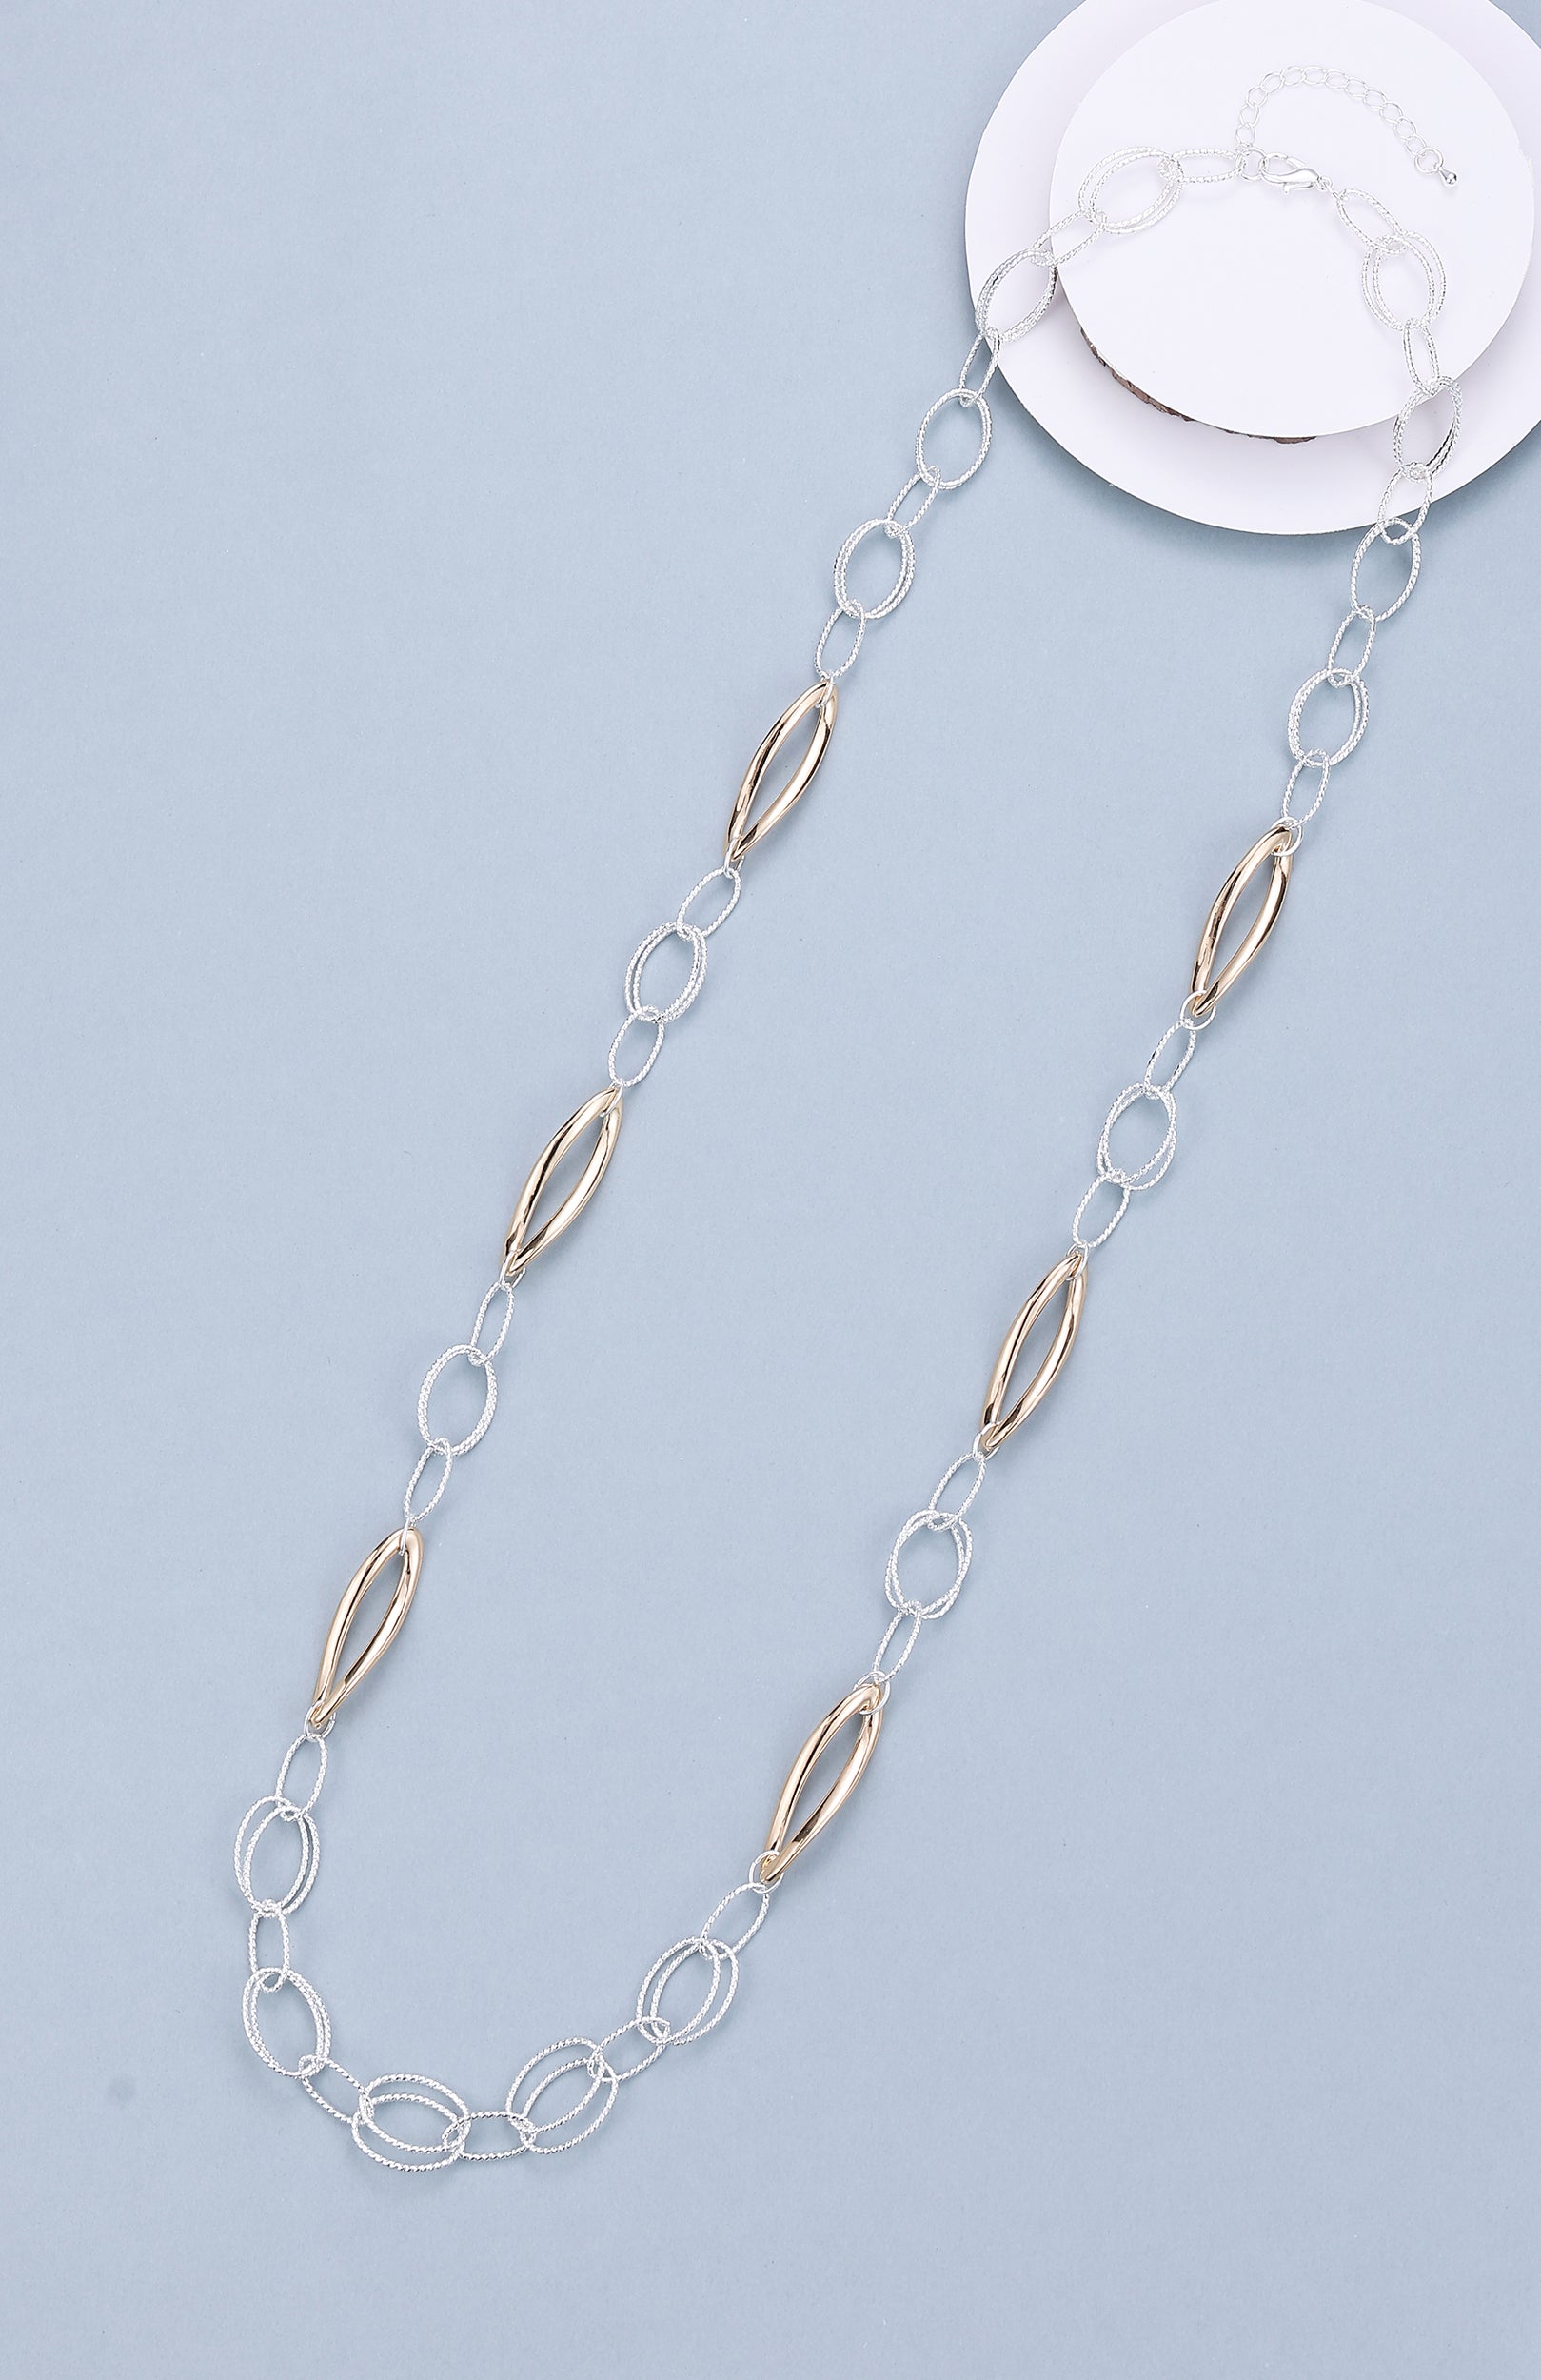 Long necklace, with gold and silver interlinked circles - on a silver chain